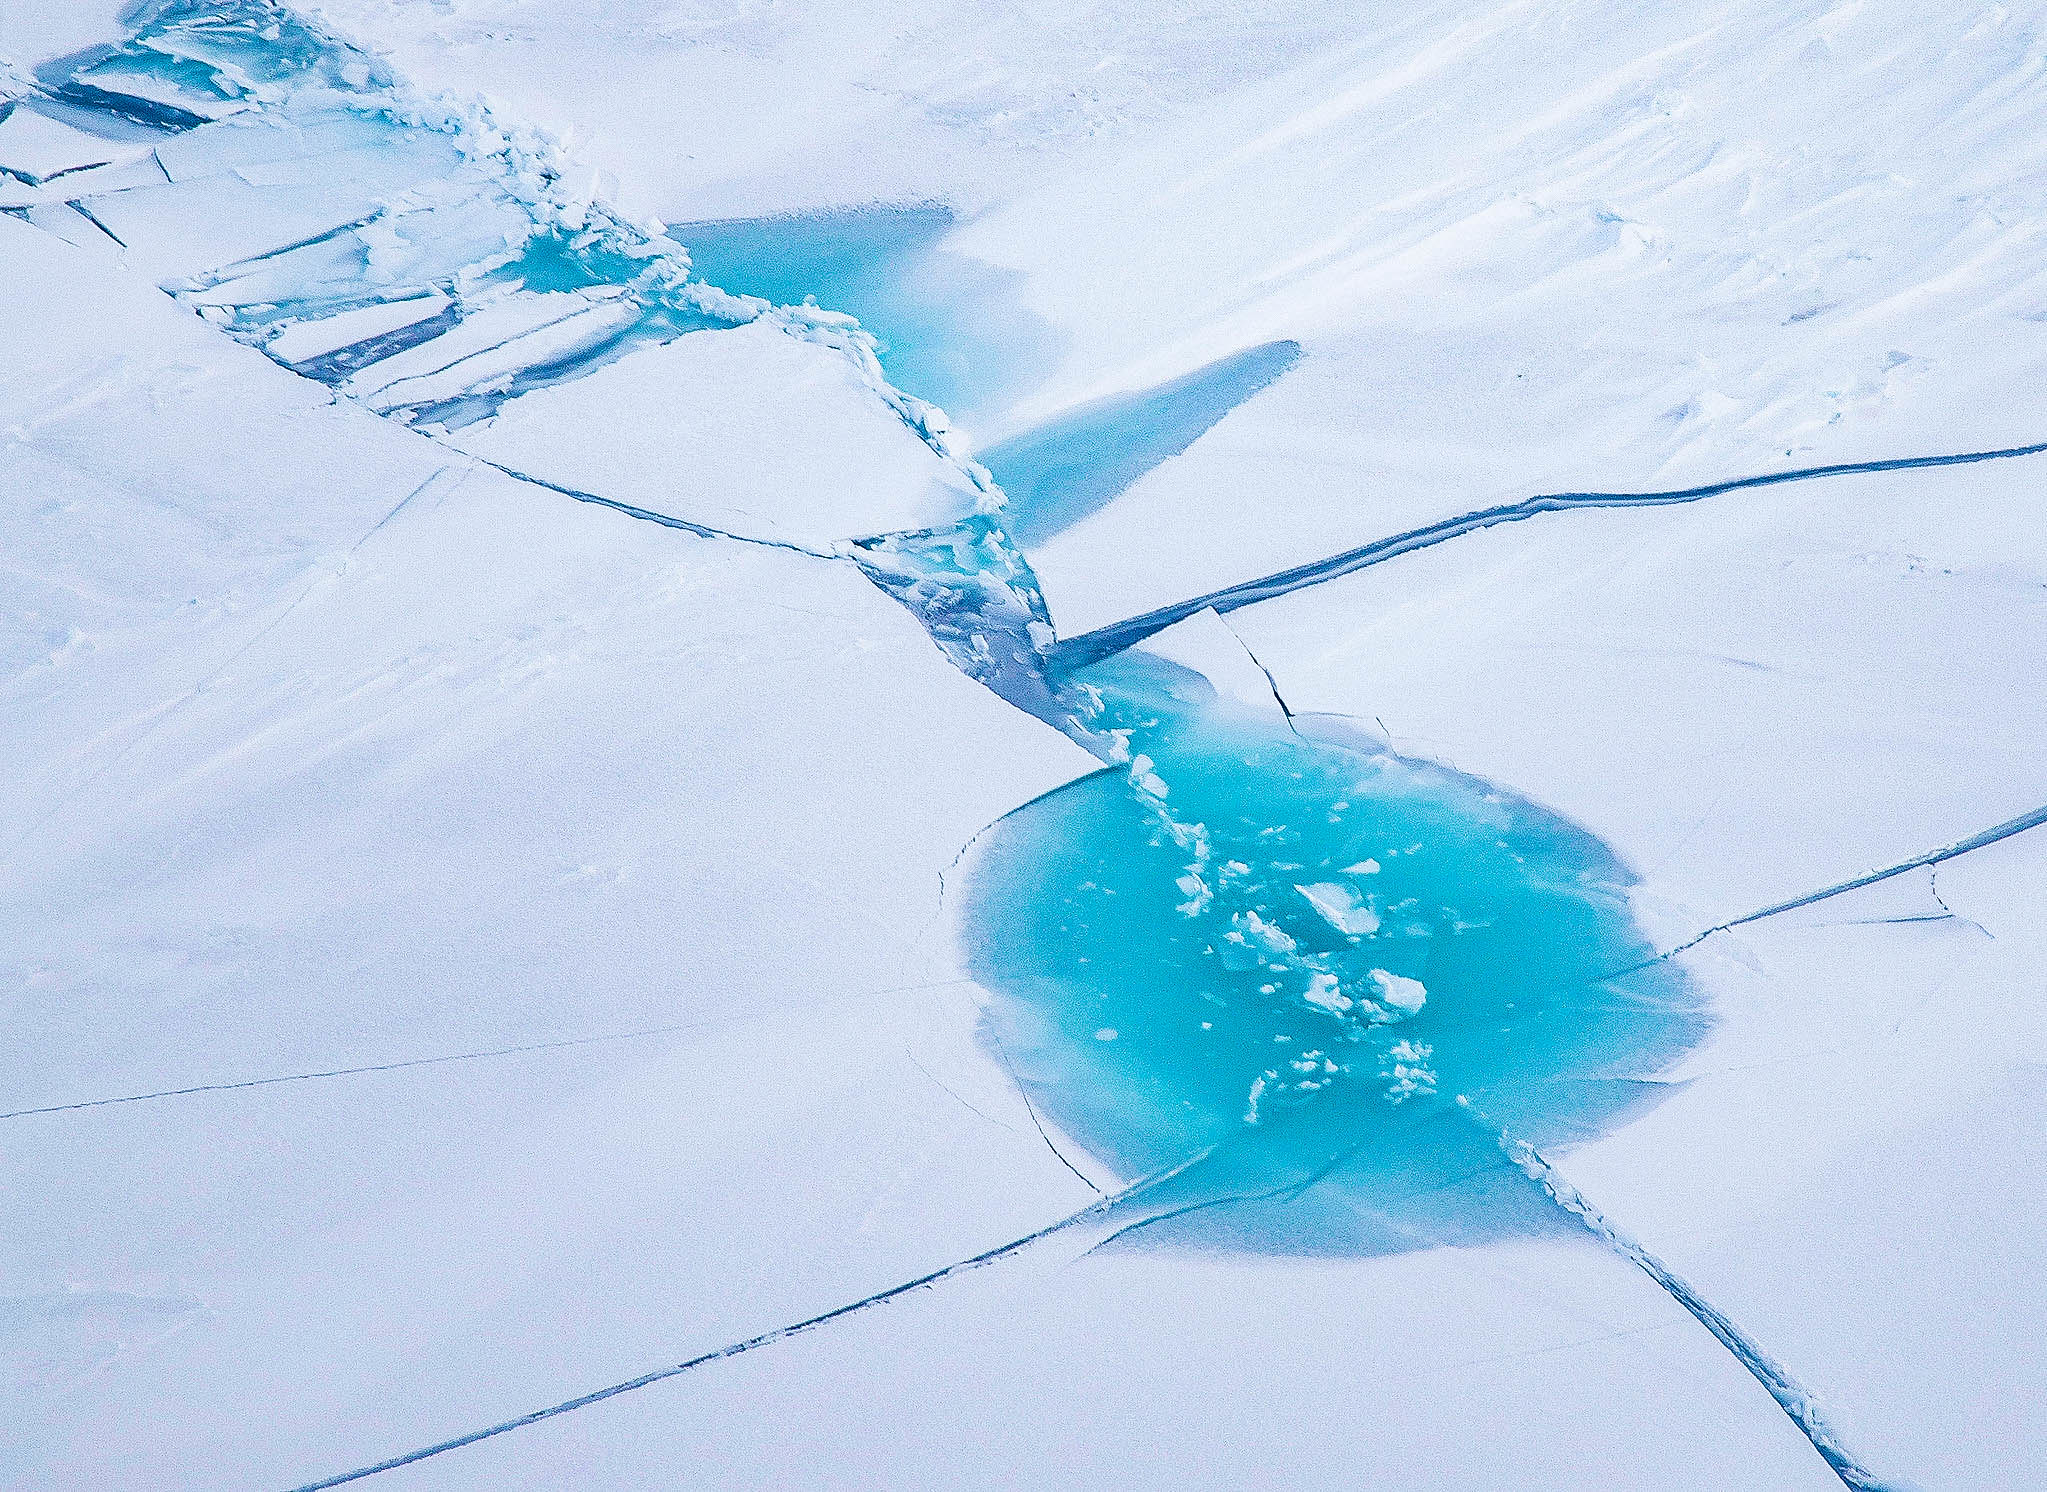 A photo of a teal melt pond on cracked sea ice. The ice looks like a sheet of broken white glass. Bright teal water puddles at the center of the break.